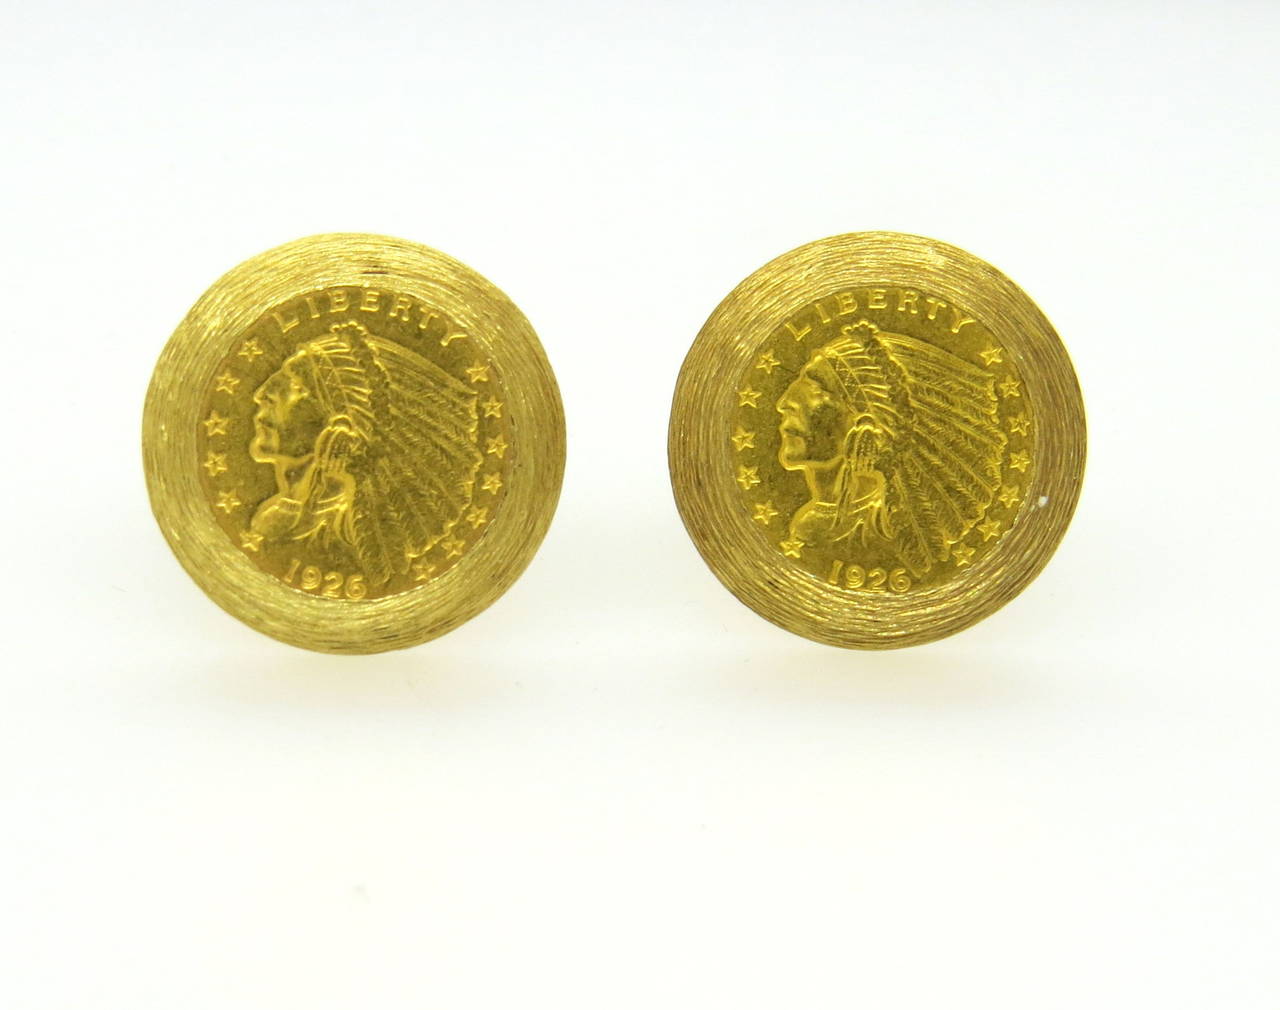 14k  gold cufflinks set with 1926 Indian head gold coin in the center. Cufflink top measures 24mm in diameter.  weight - 26.2 gr